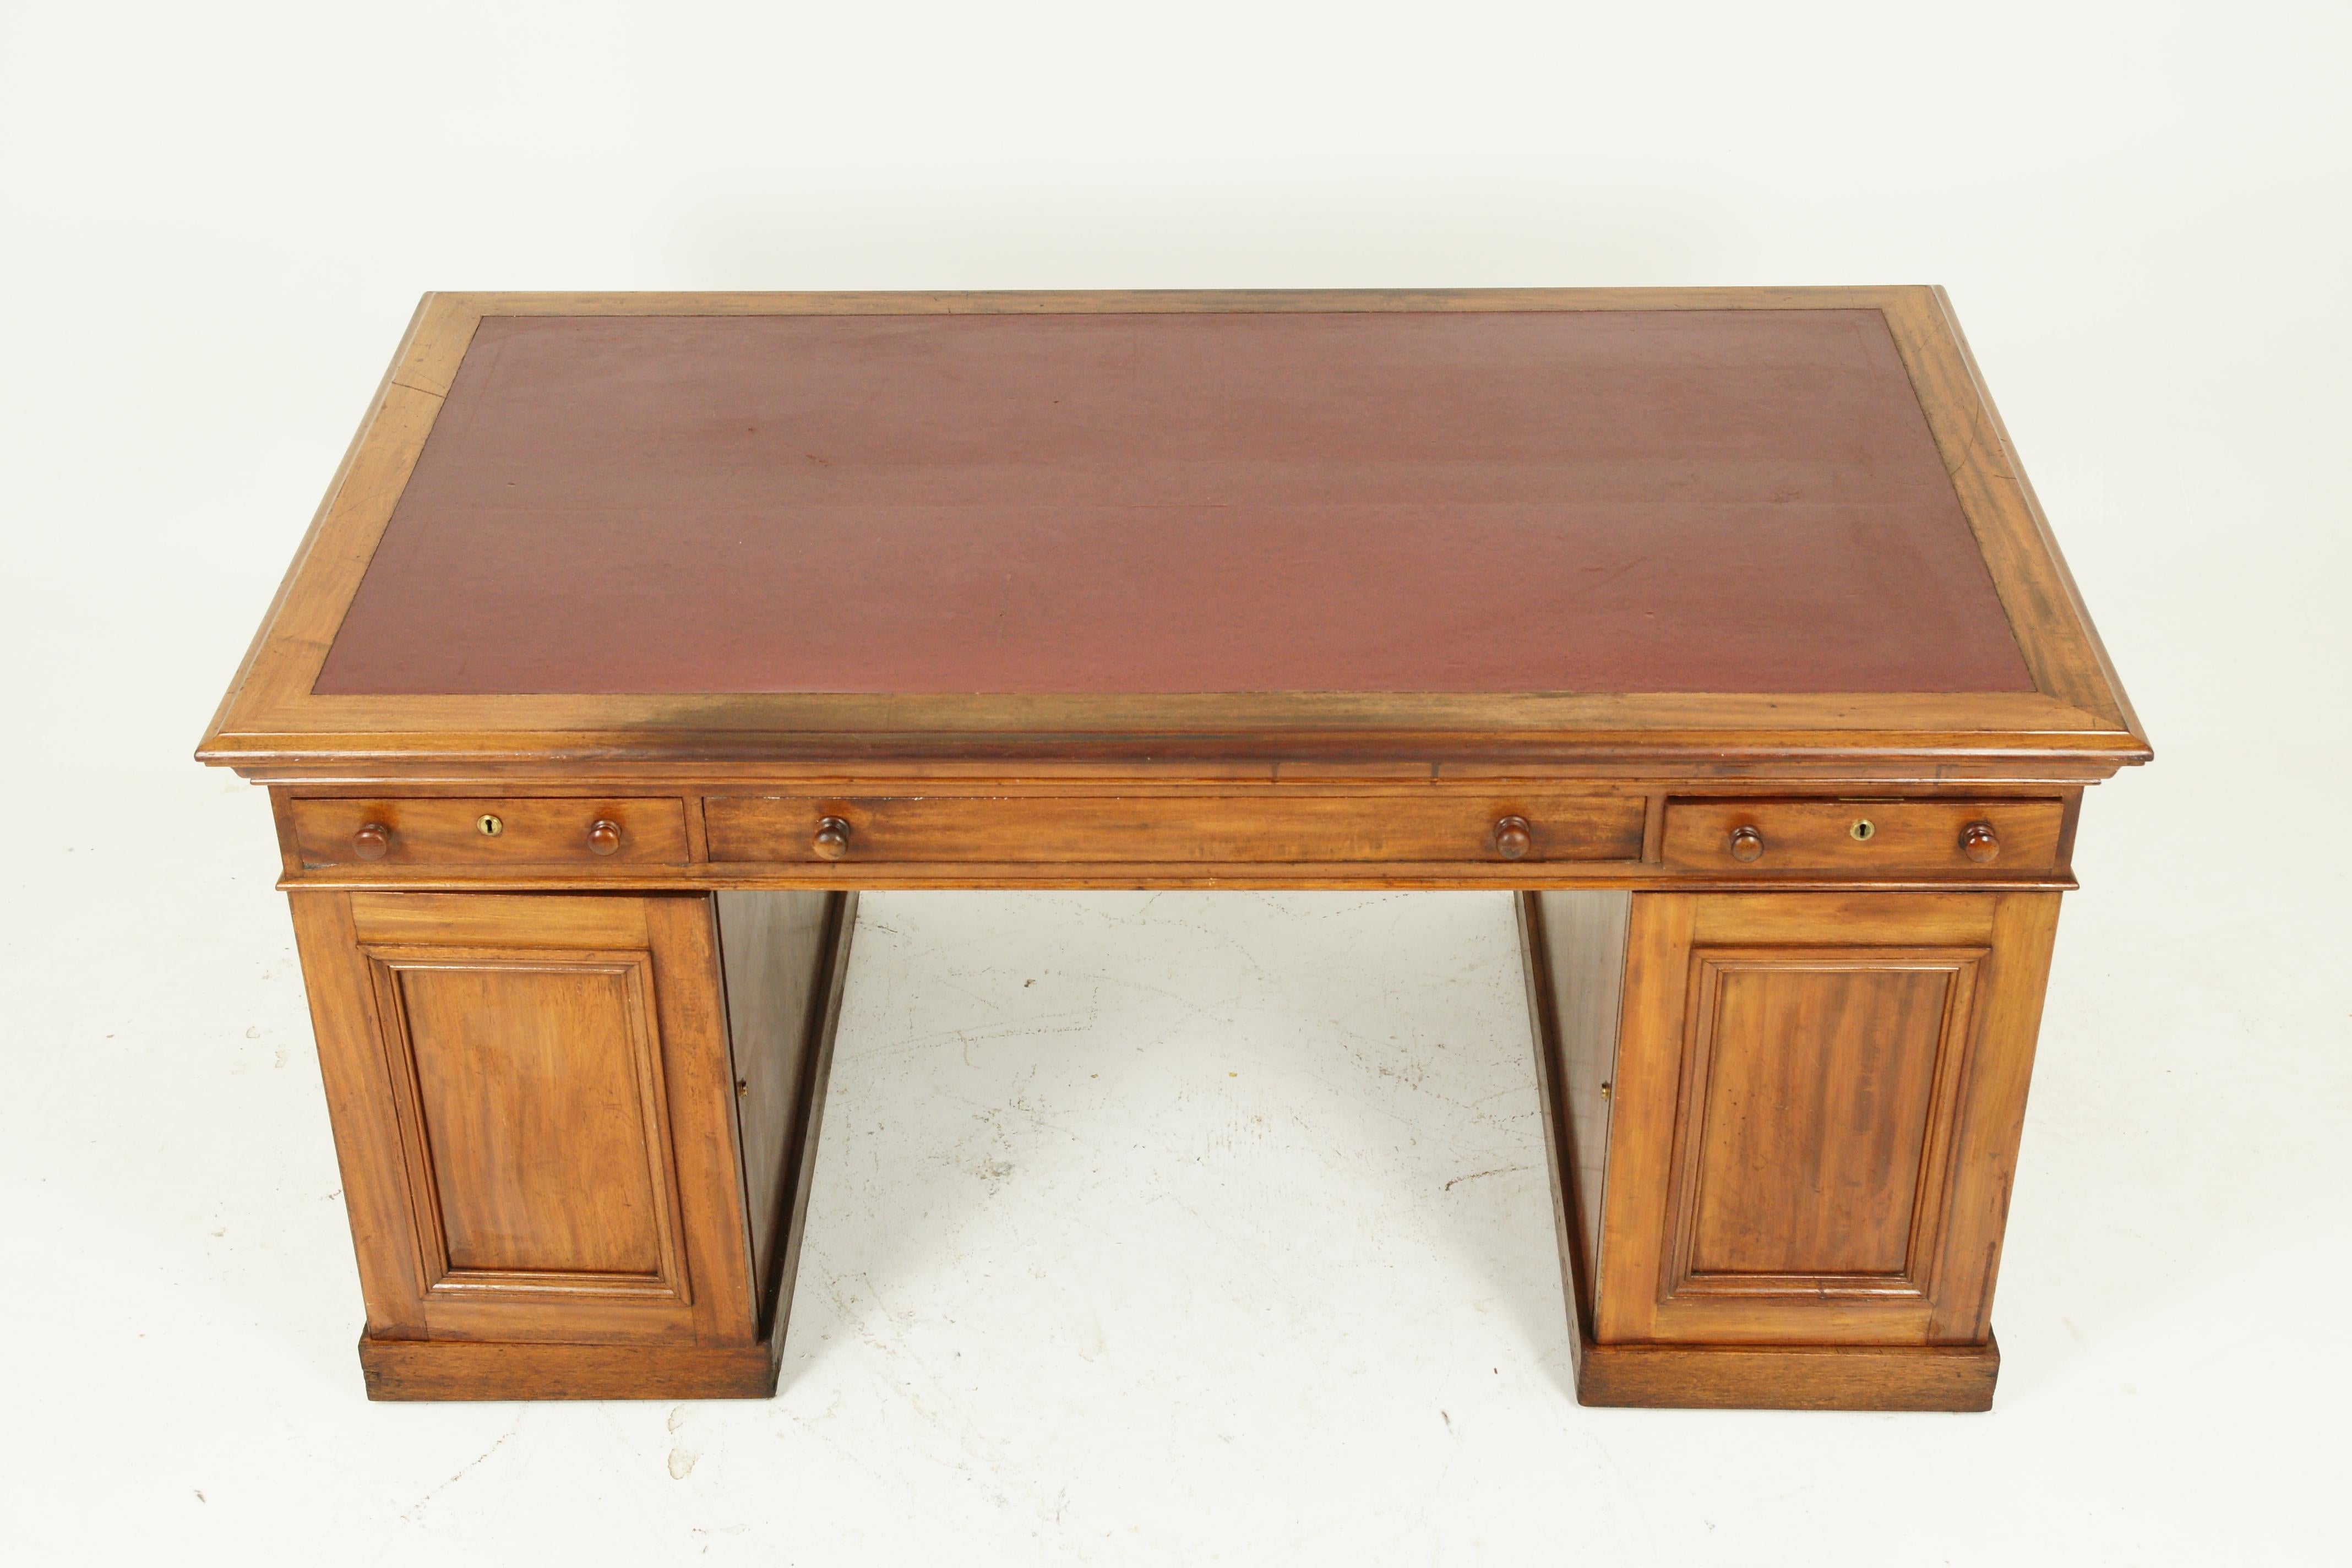 Antique partners desk, walnut desk, Victorian, 24-drawer desk, antique furniture, B1371

Solid walnut with original finish
Rectangular top with inserts
Moulded edge
Top of the desk has three drawers to one end with an original leather writing